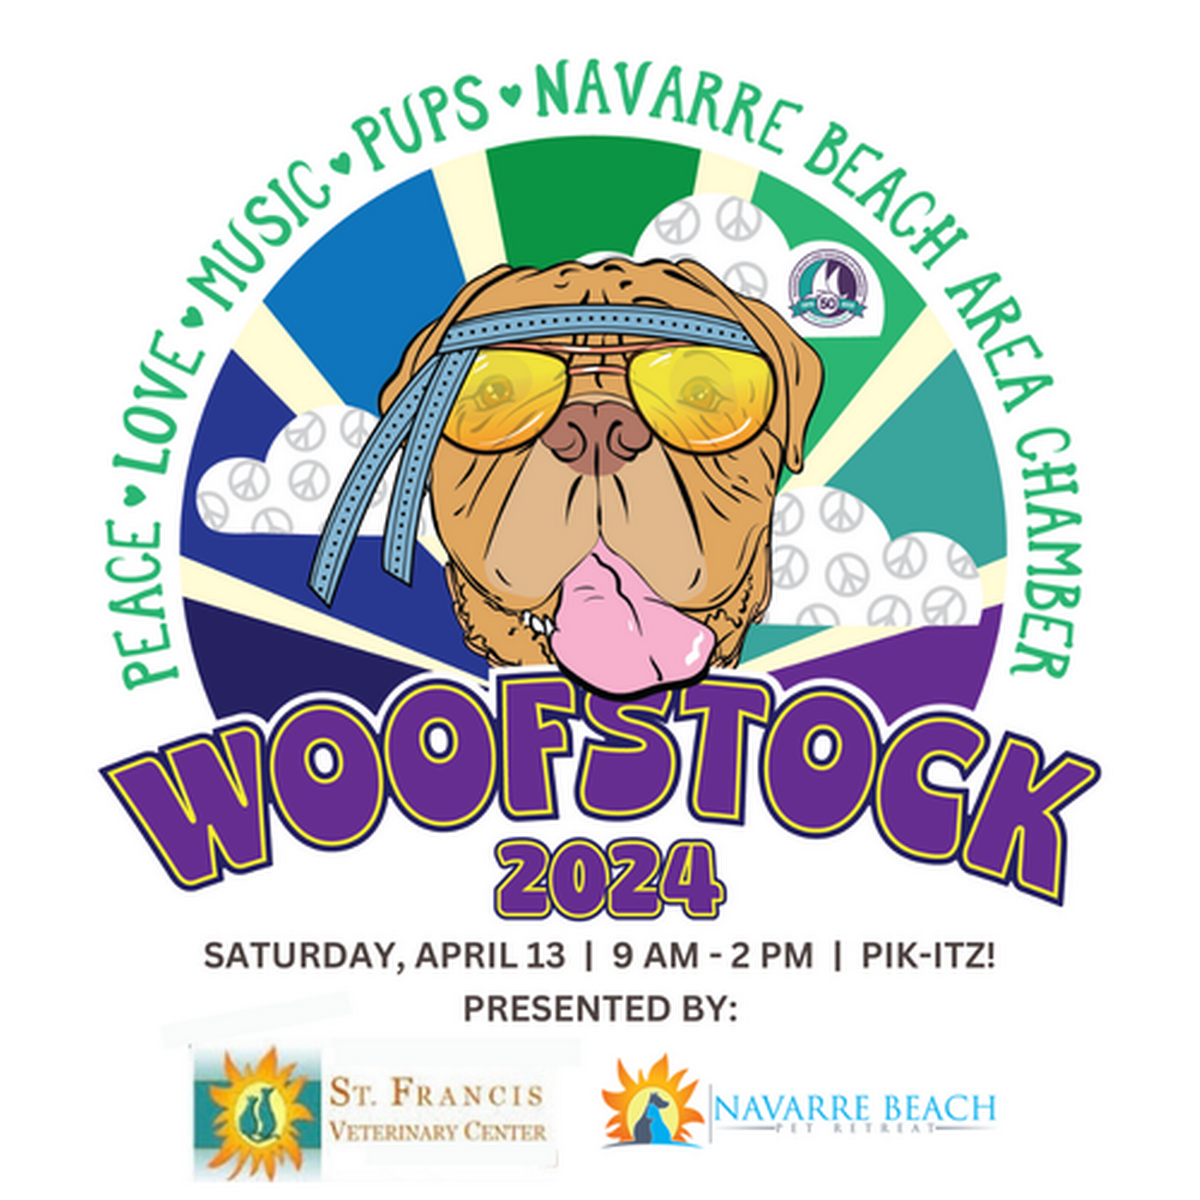 WOOFSTOCK 2024 Presented by St Francis Veterinary Center and Navarre